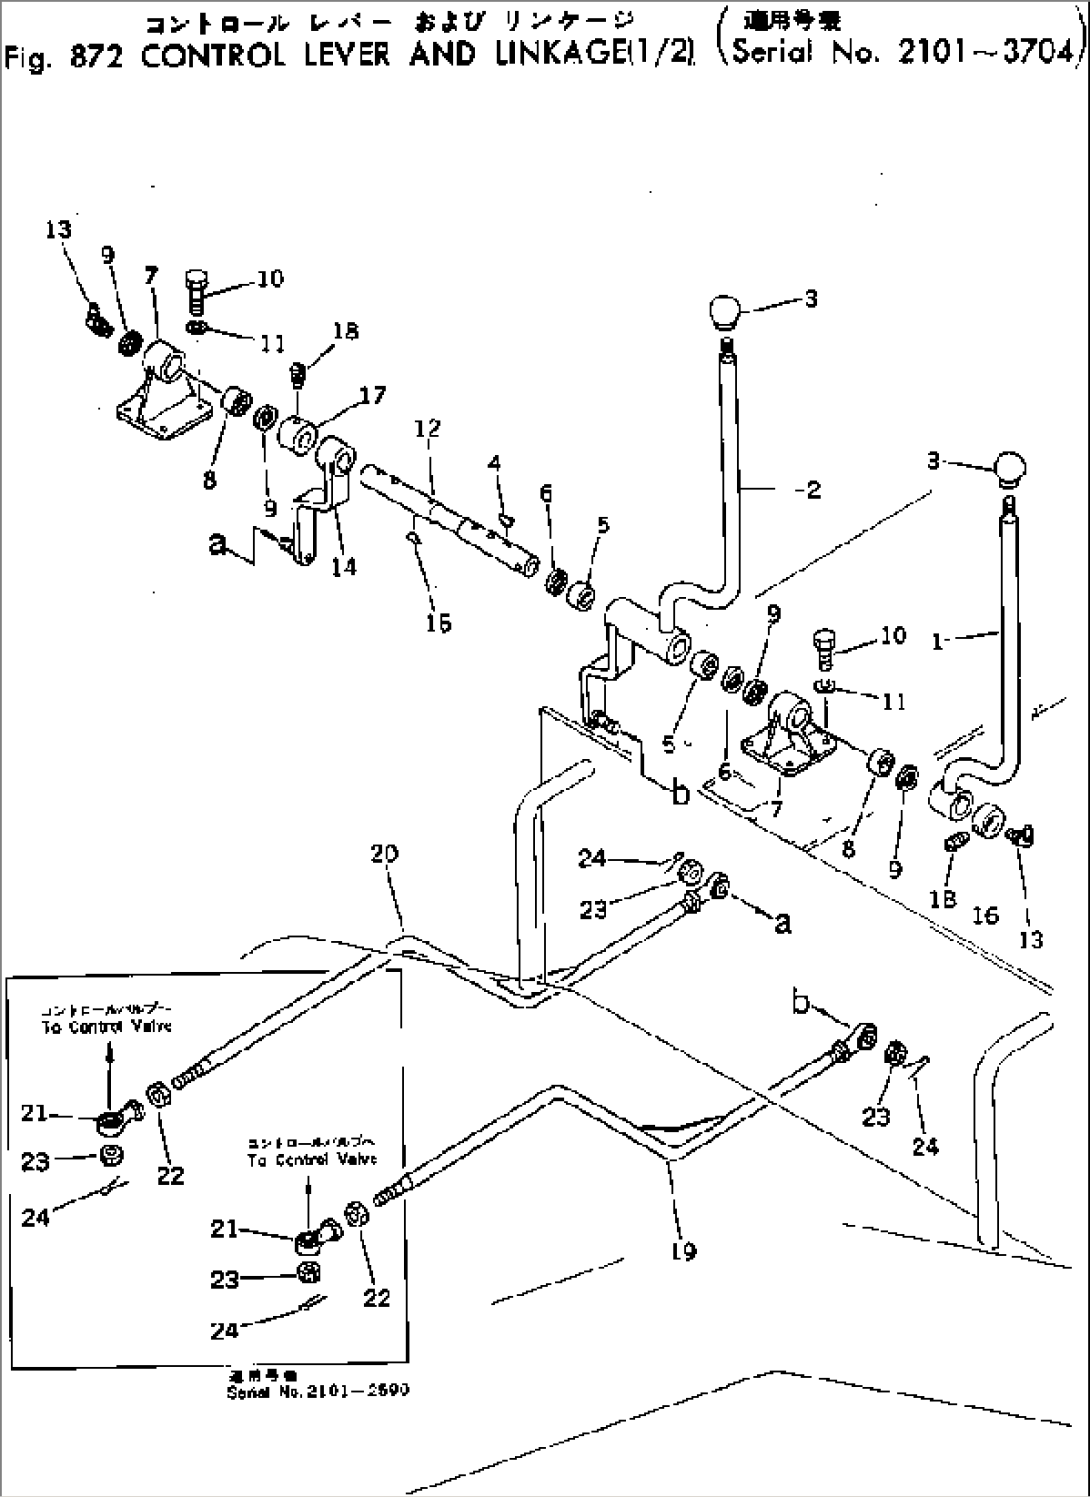 CONTROL LEVER AND LINKAGE (1/2)(#2101-3704)